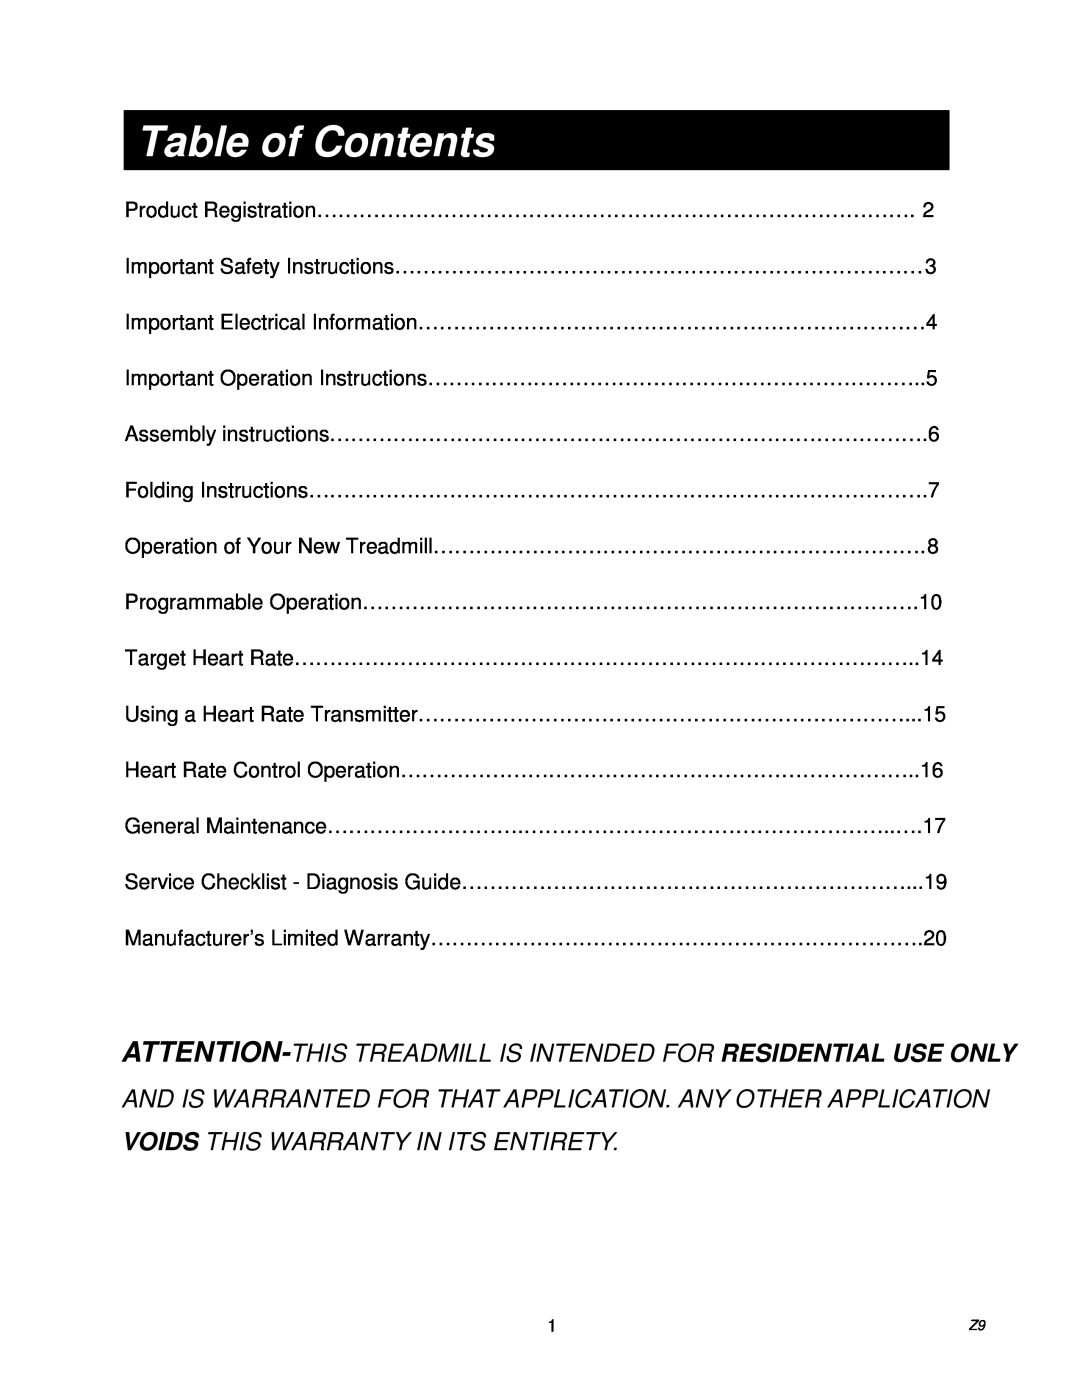 Spirit Z9 owner manual Table of Contents, Attention-This Treadmill Is Intended For Residential Use Only 